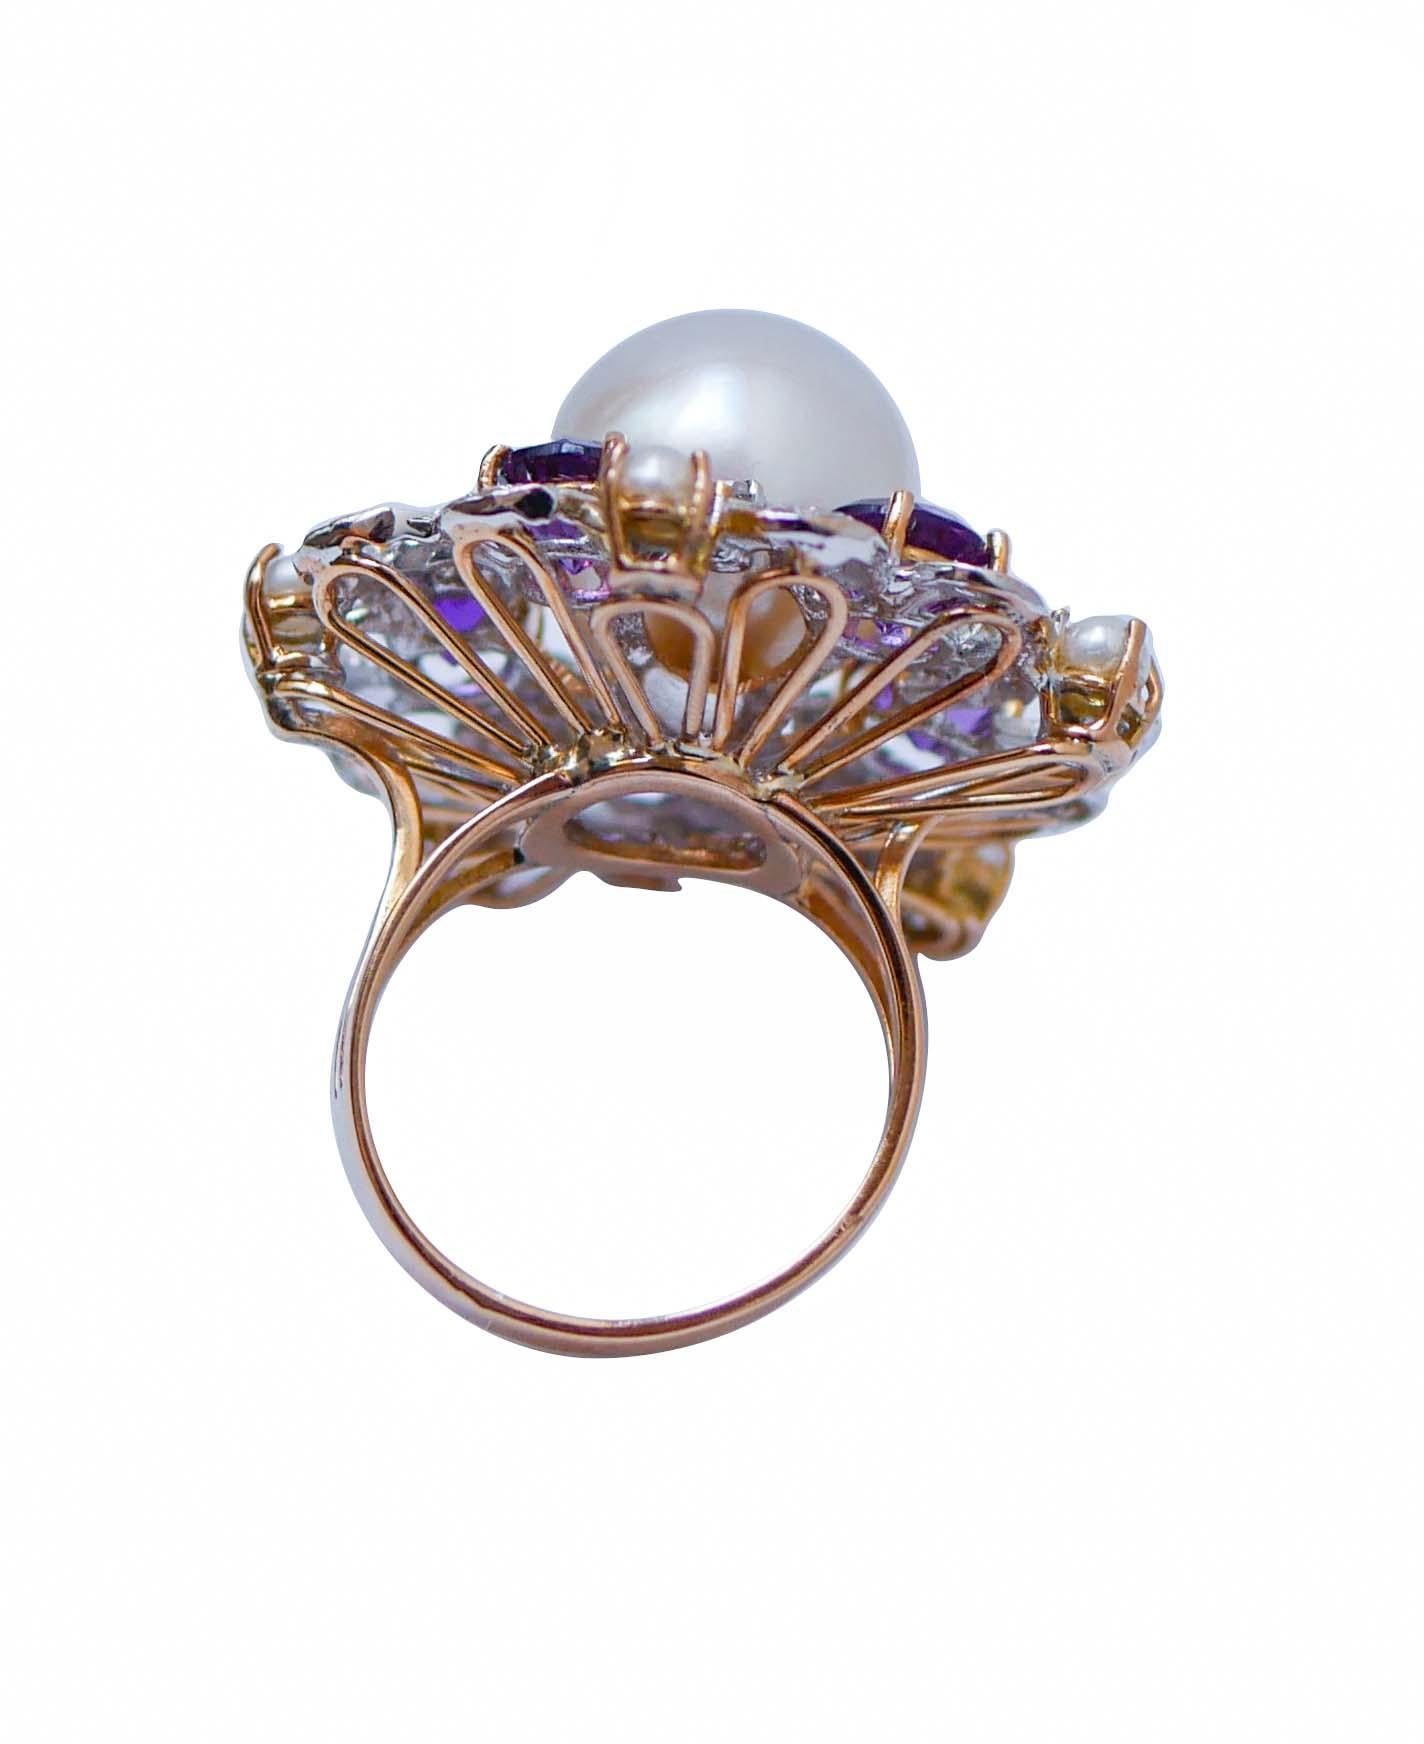 Retro South-Sea Pearl, Diamonds, Amethysts, Pearls, 14Kt Rose Gold and White Gold Ring For Sale